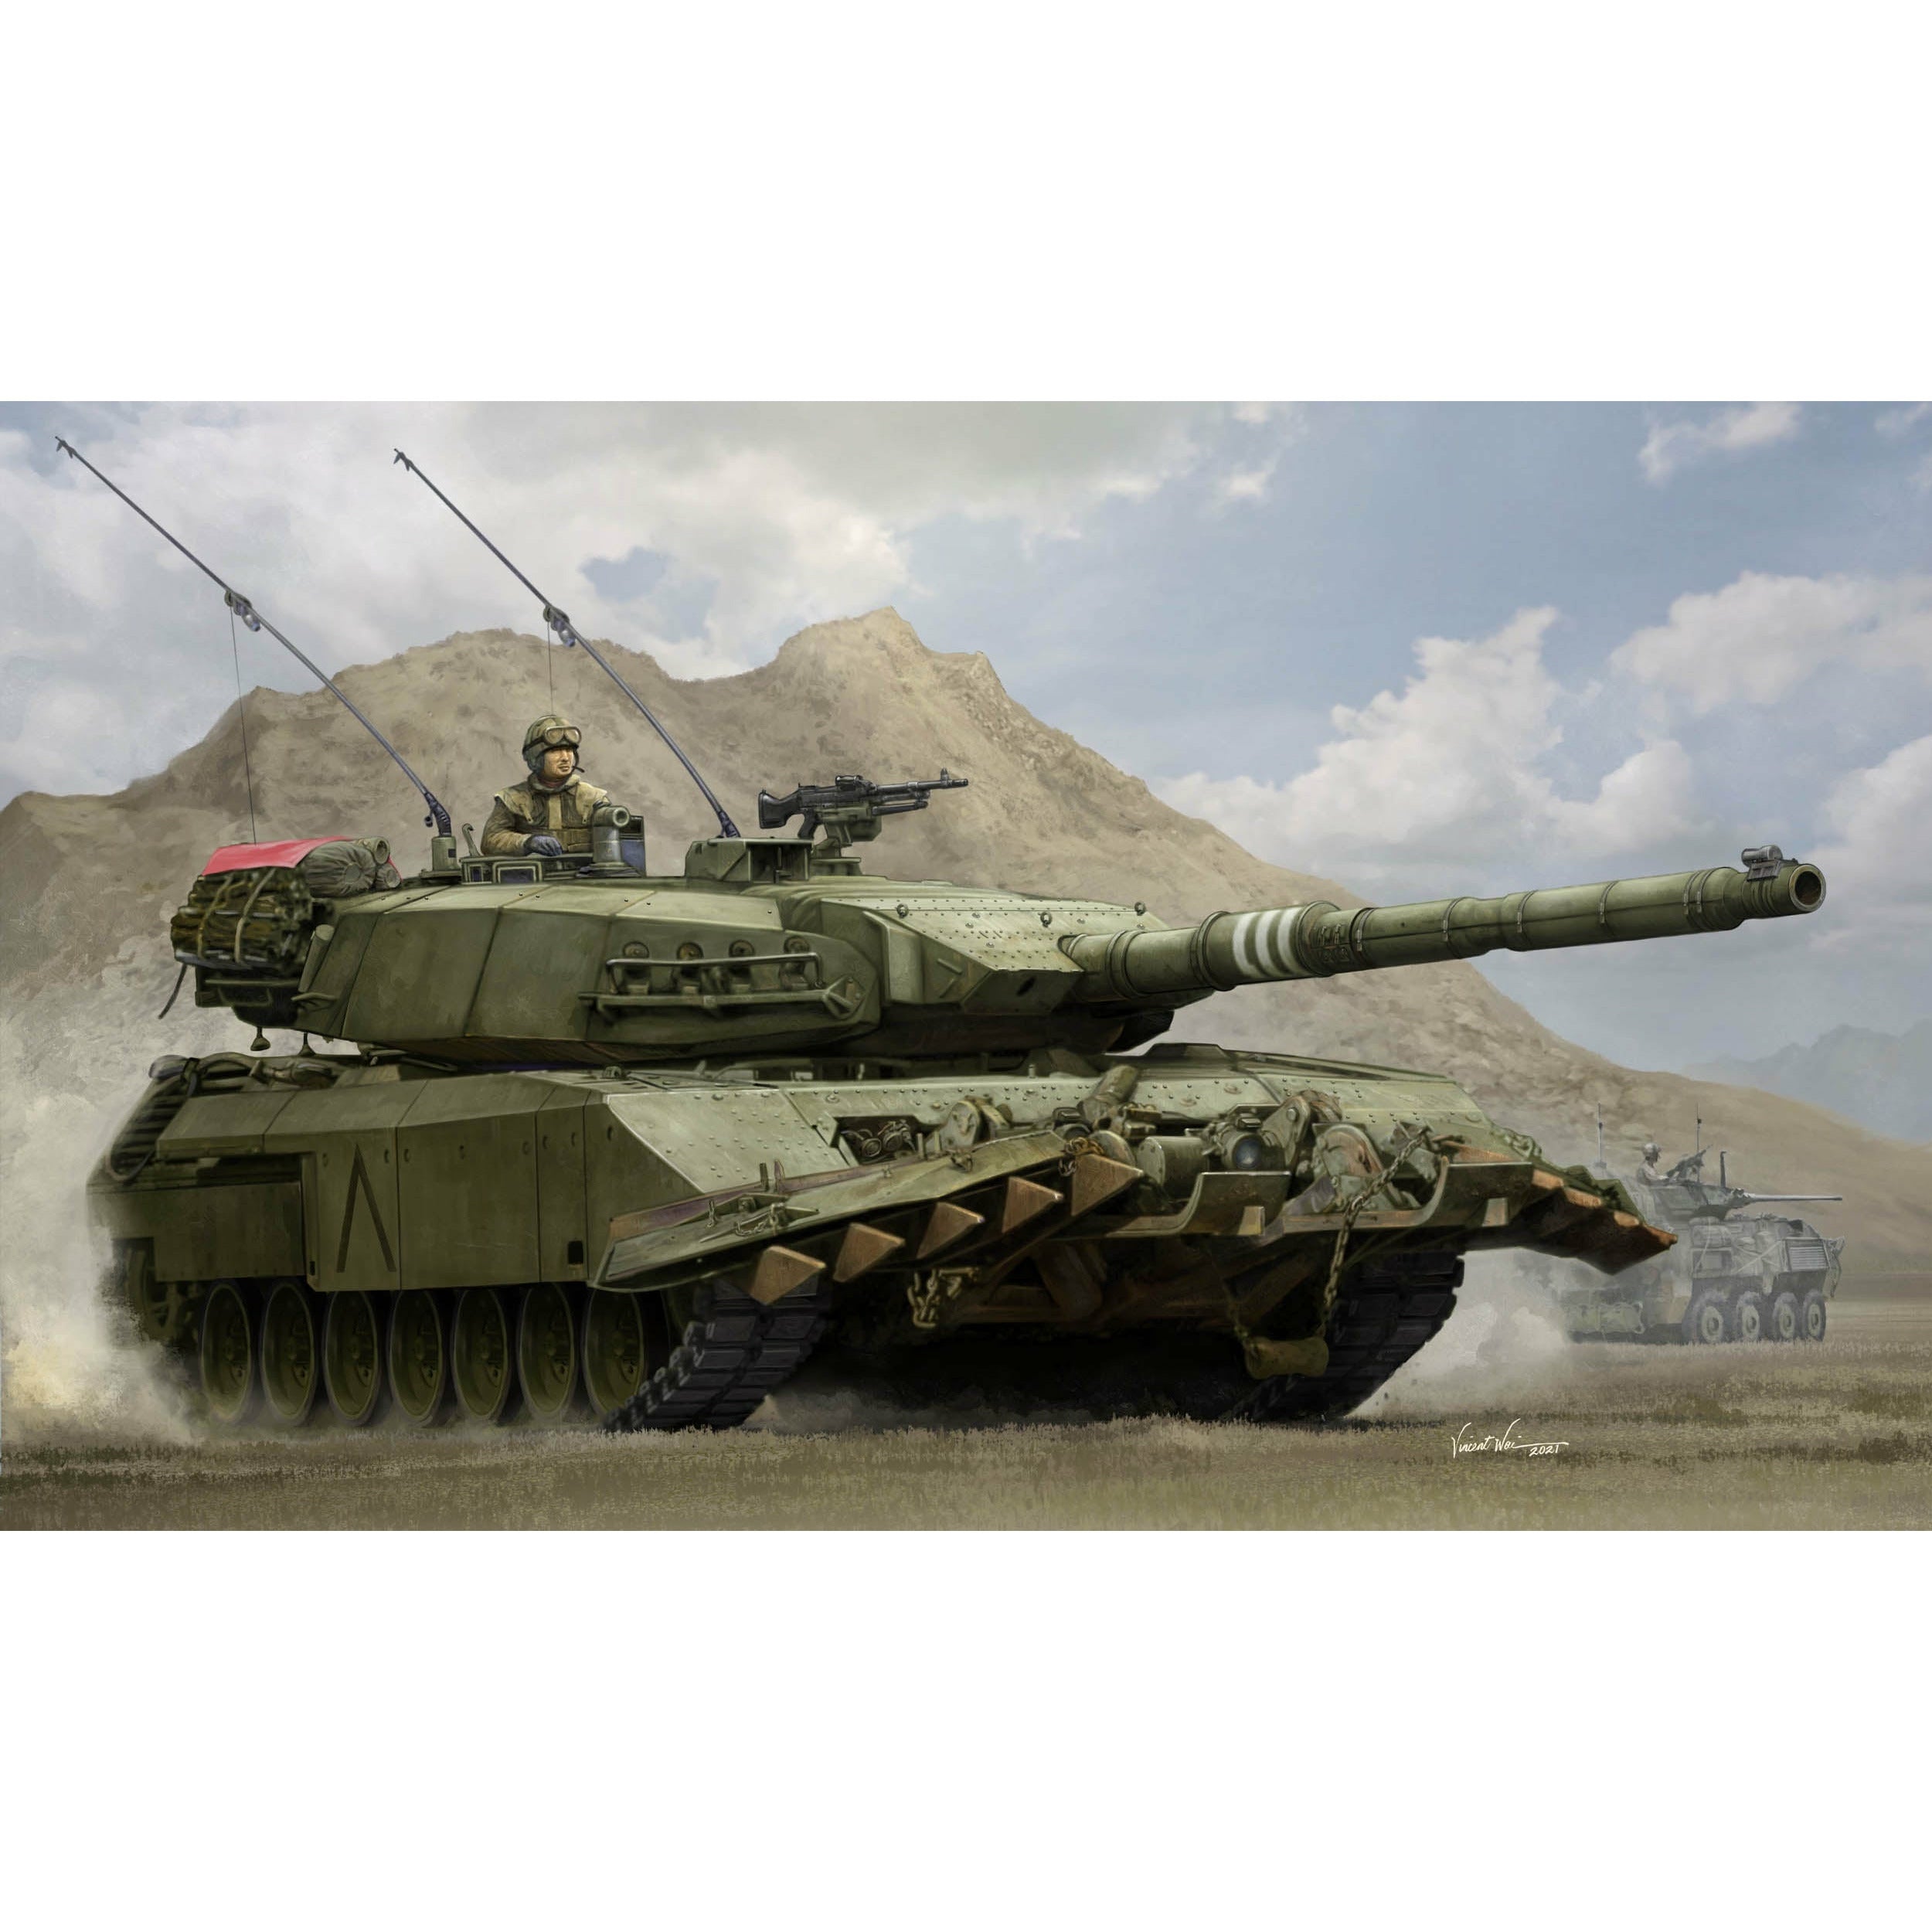 Leopard C2 MEXAS with TWMP 1/35 #84557 by Hobby Boss